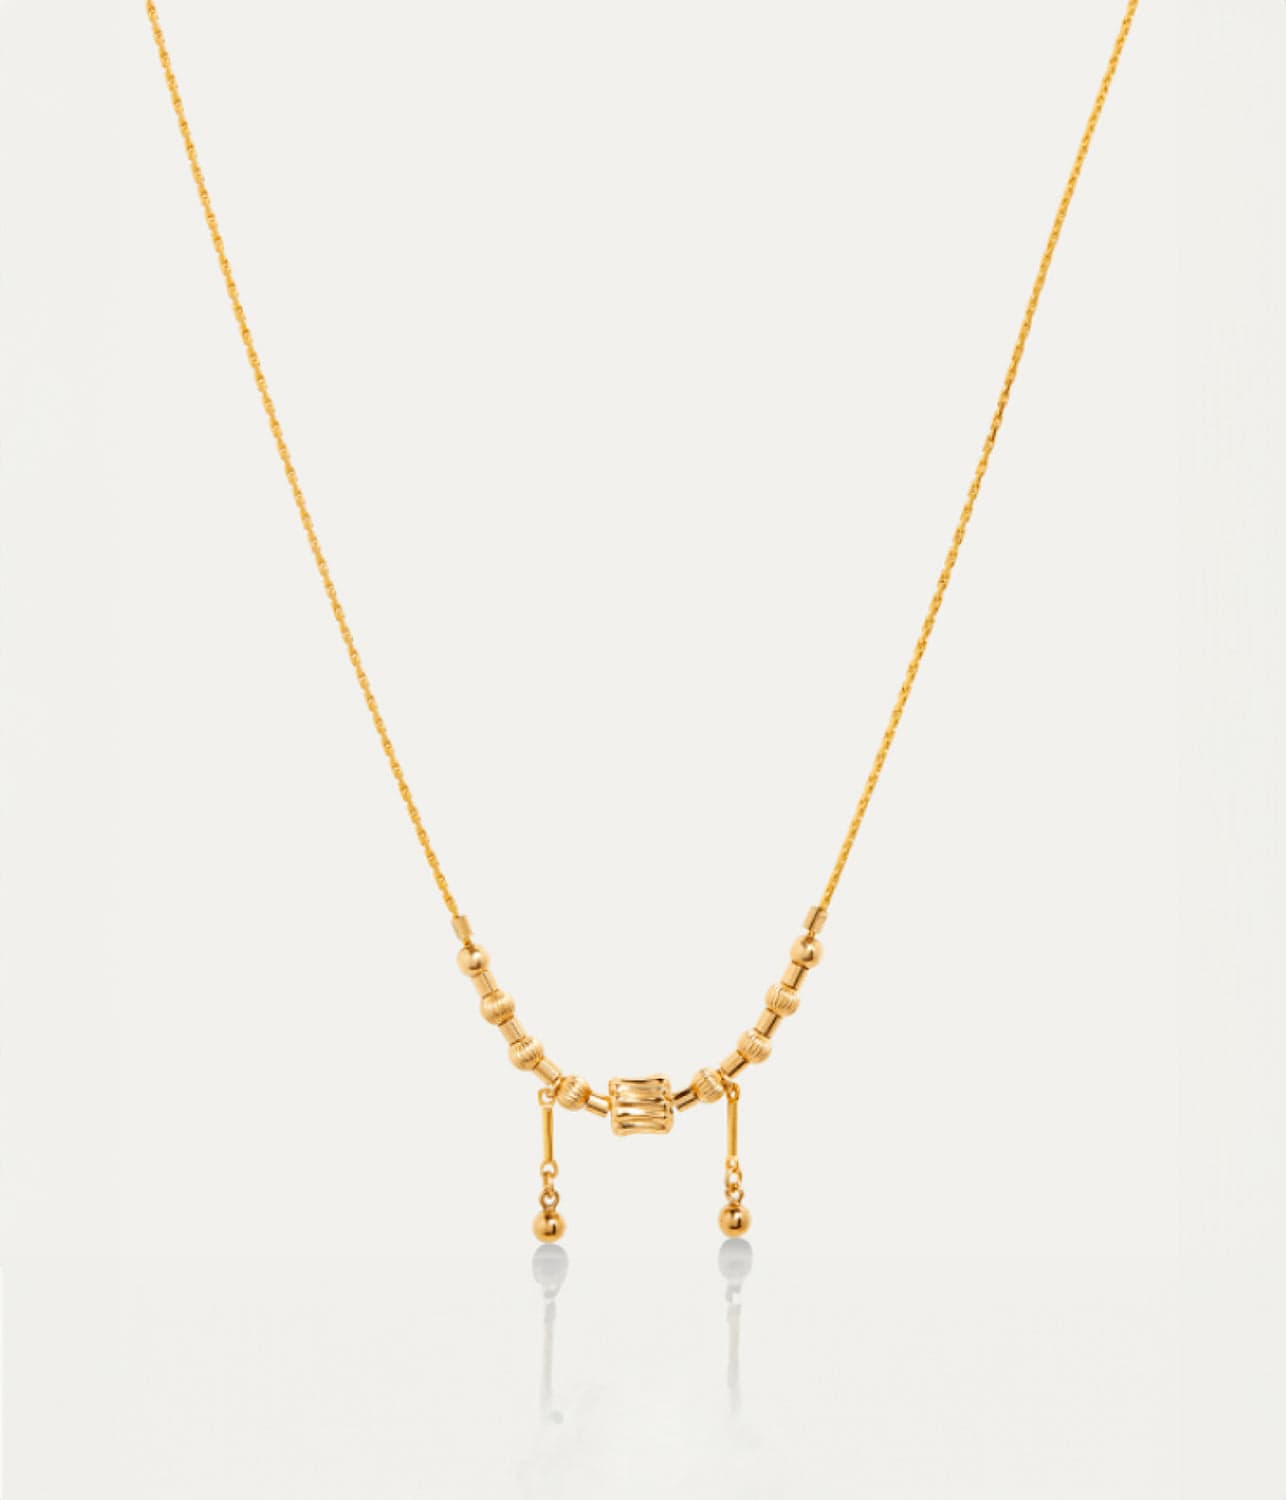 CLOVER NECKLACE - GOLD FILLED | PETITE GRAND| PETITE GRAND CLOVER NECKLACE